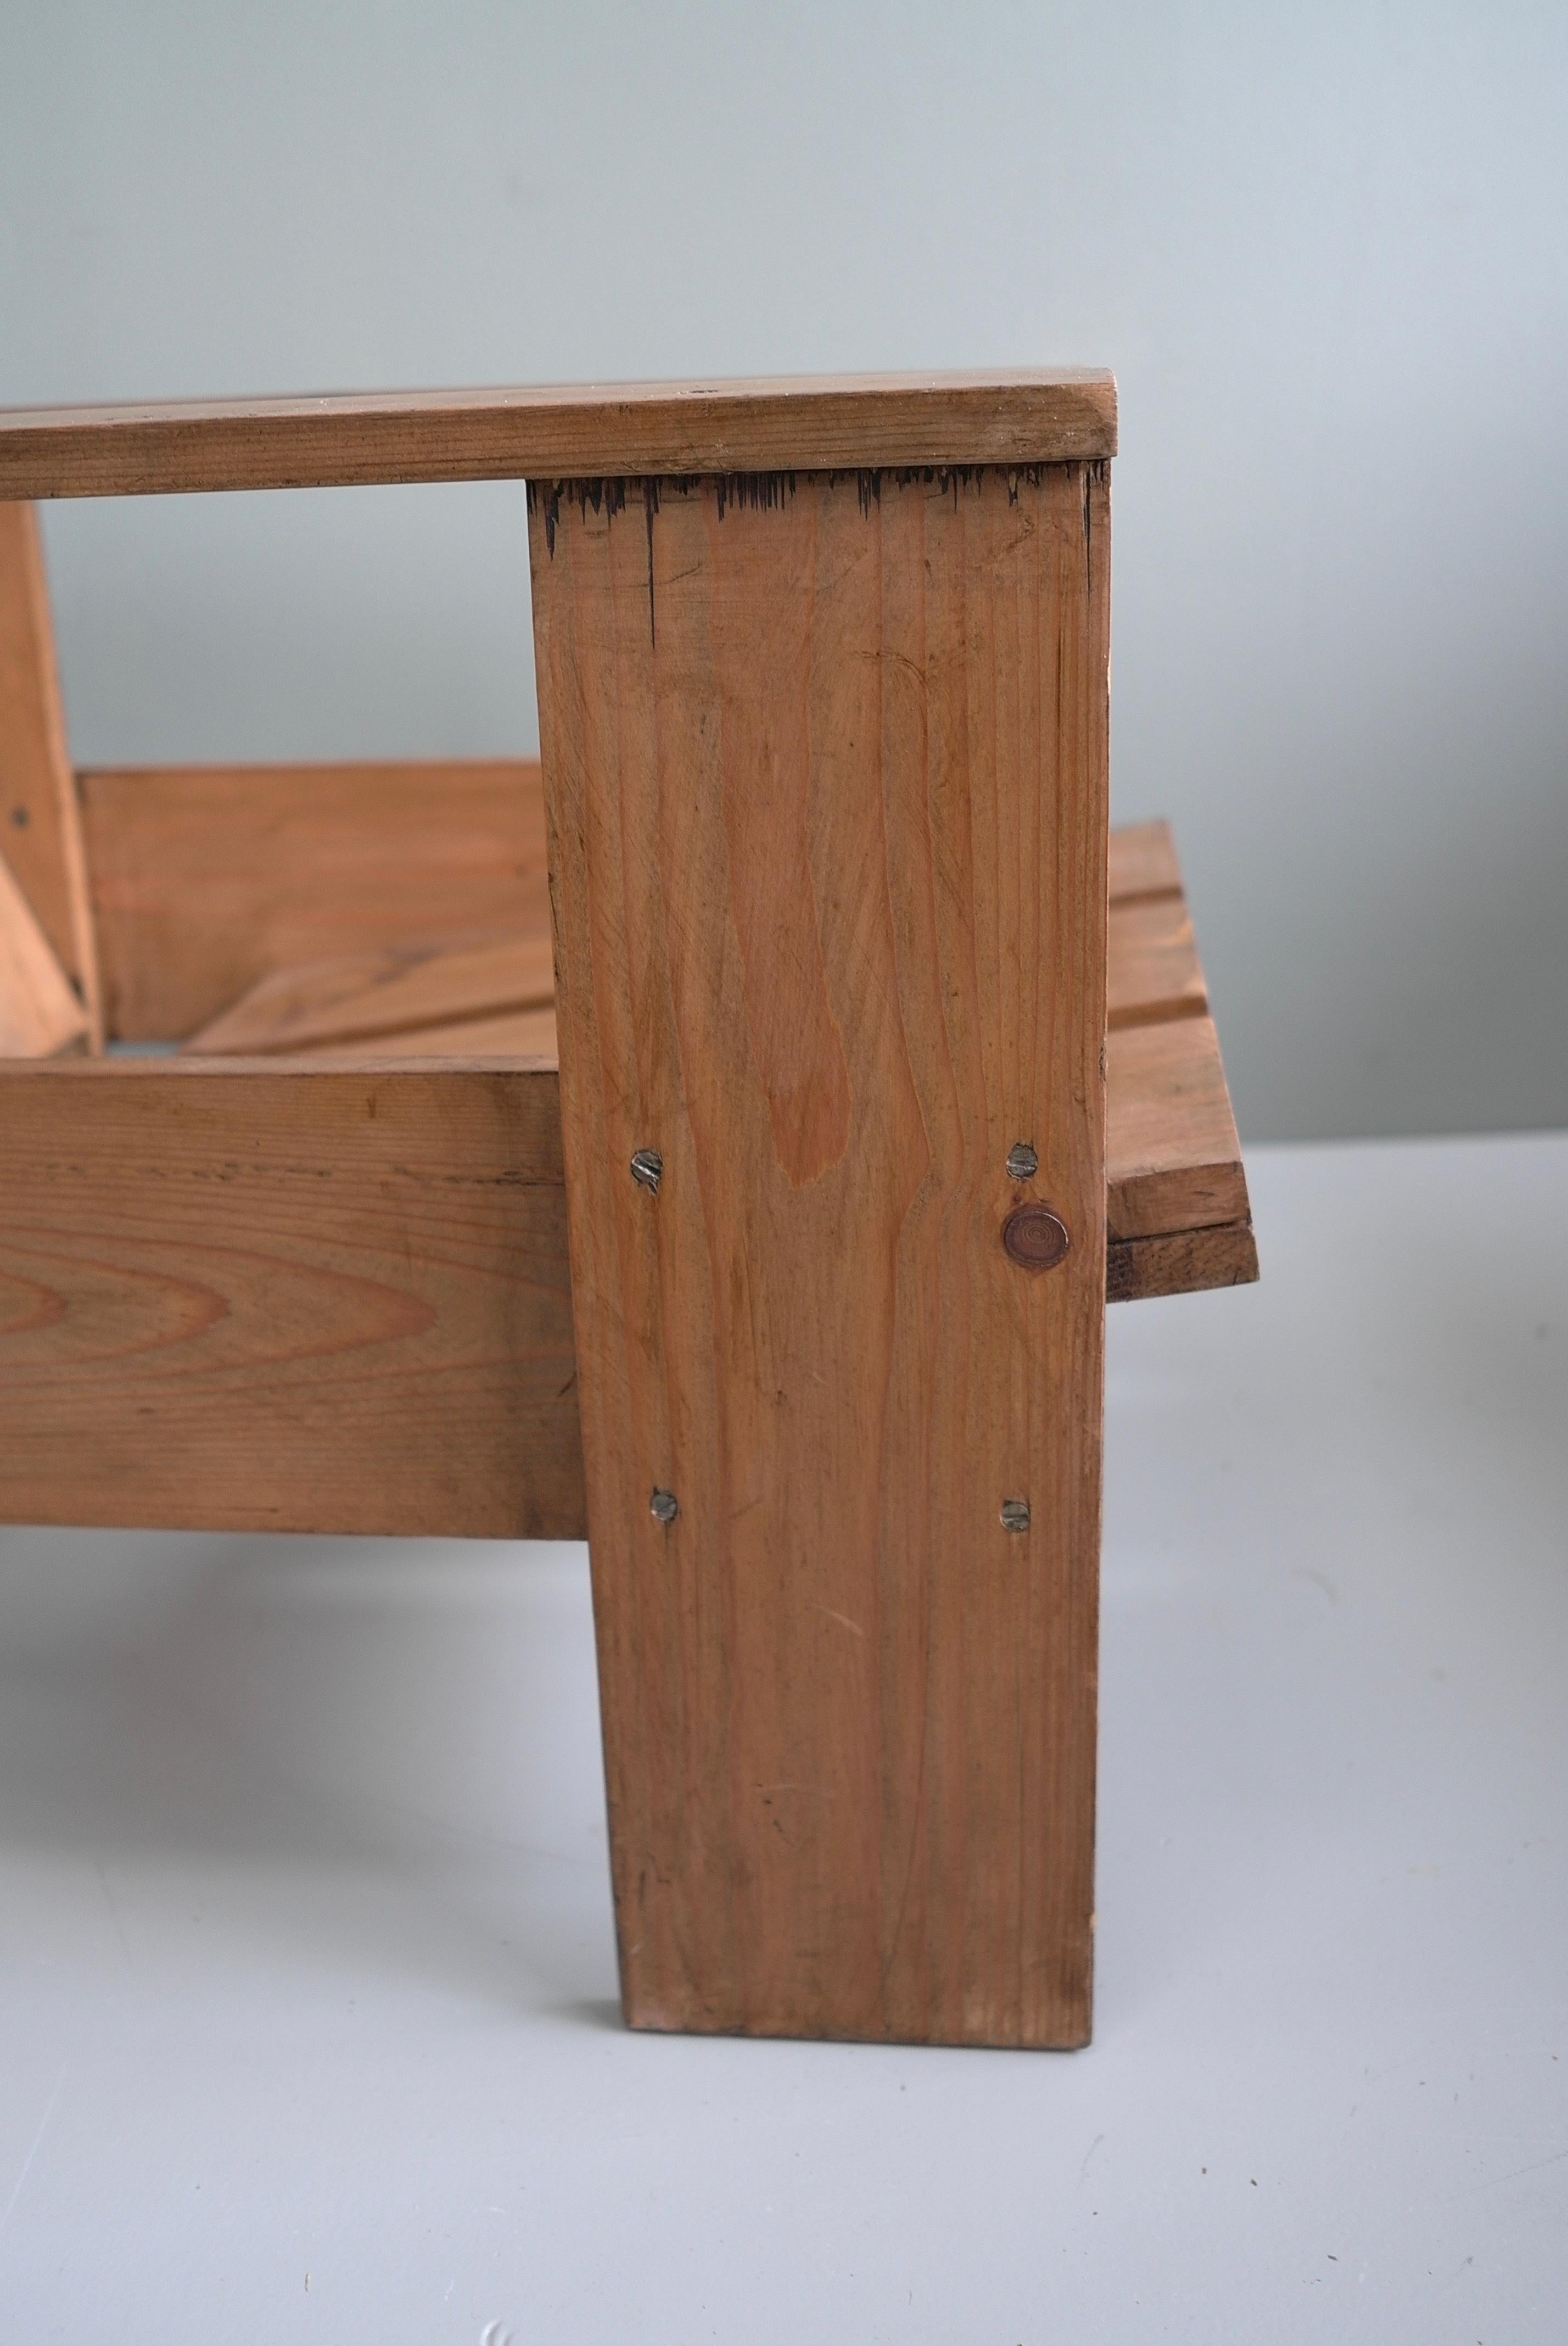 Mid-20th Century Crate Chair in style of Gerrit Rietveld, The Netherlands 1960's For Sale